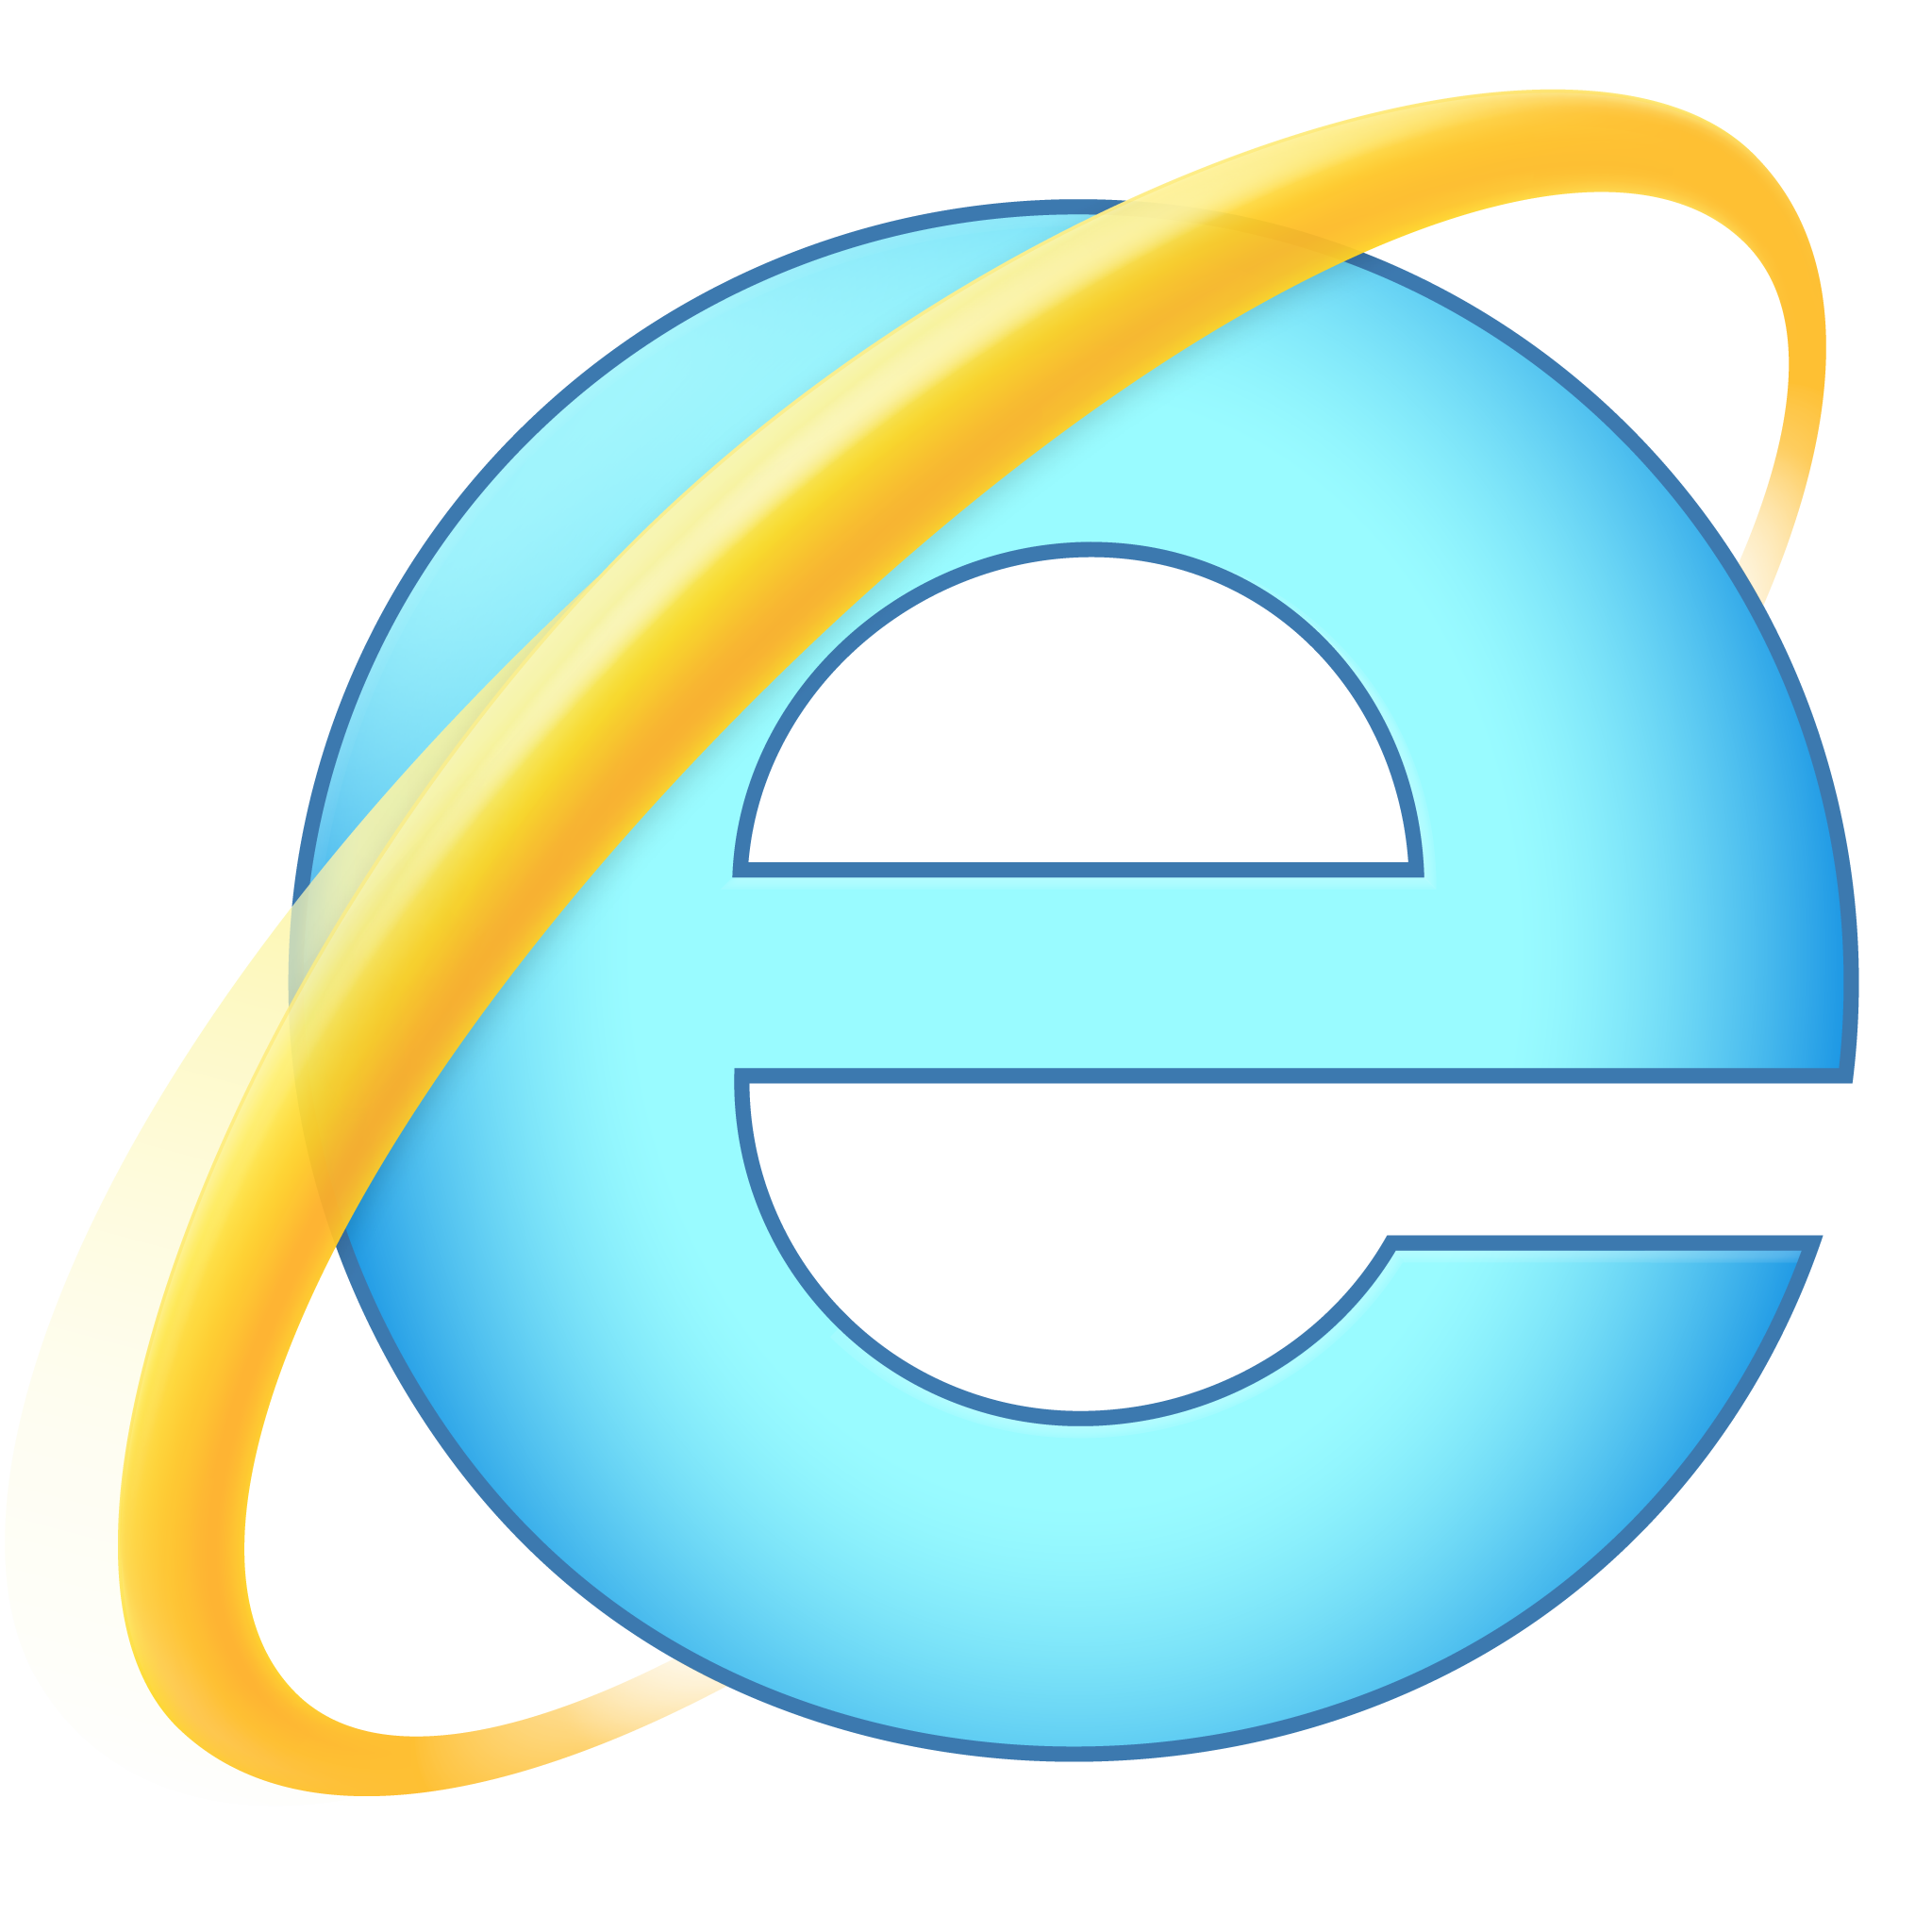 ie8 free browser - DriverLayer Search Engine